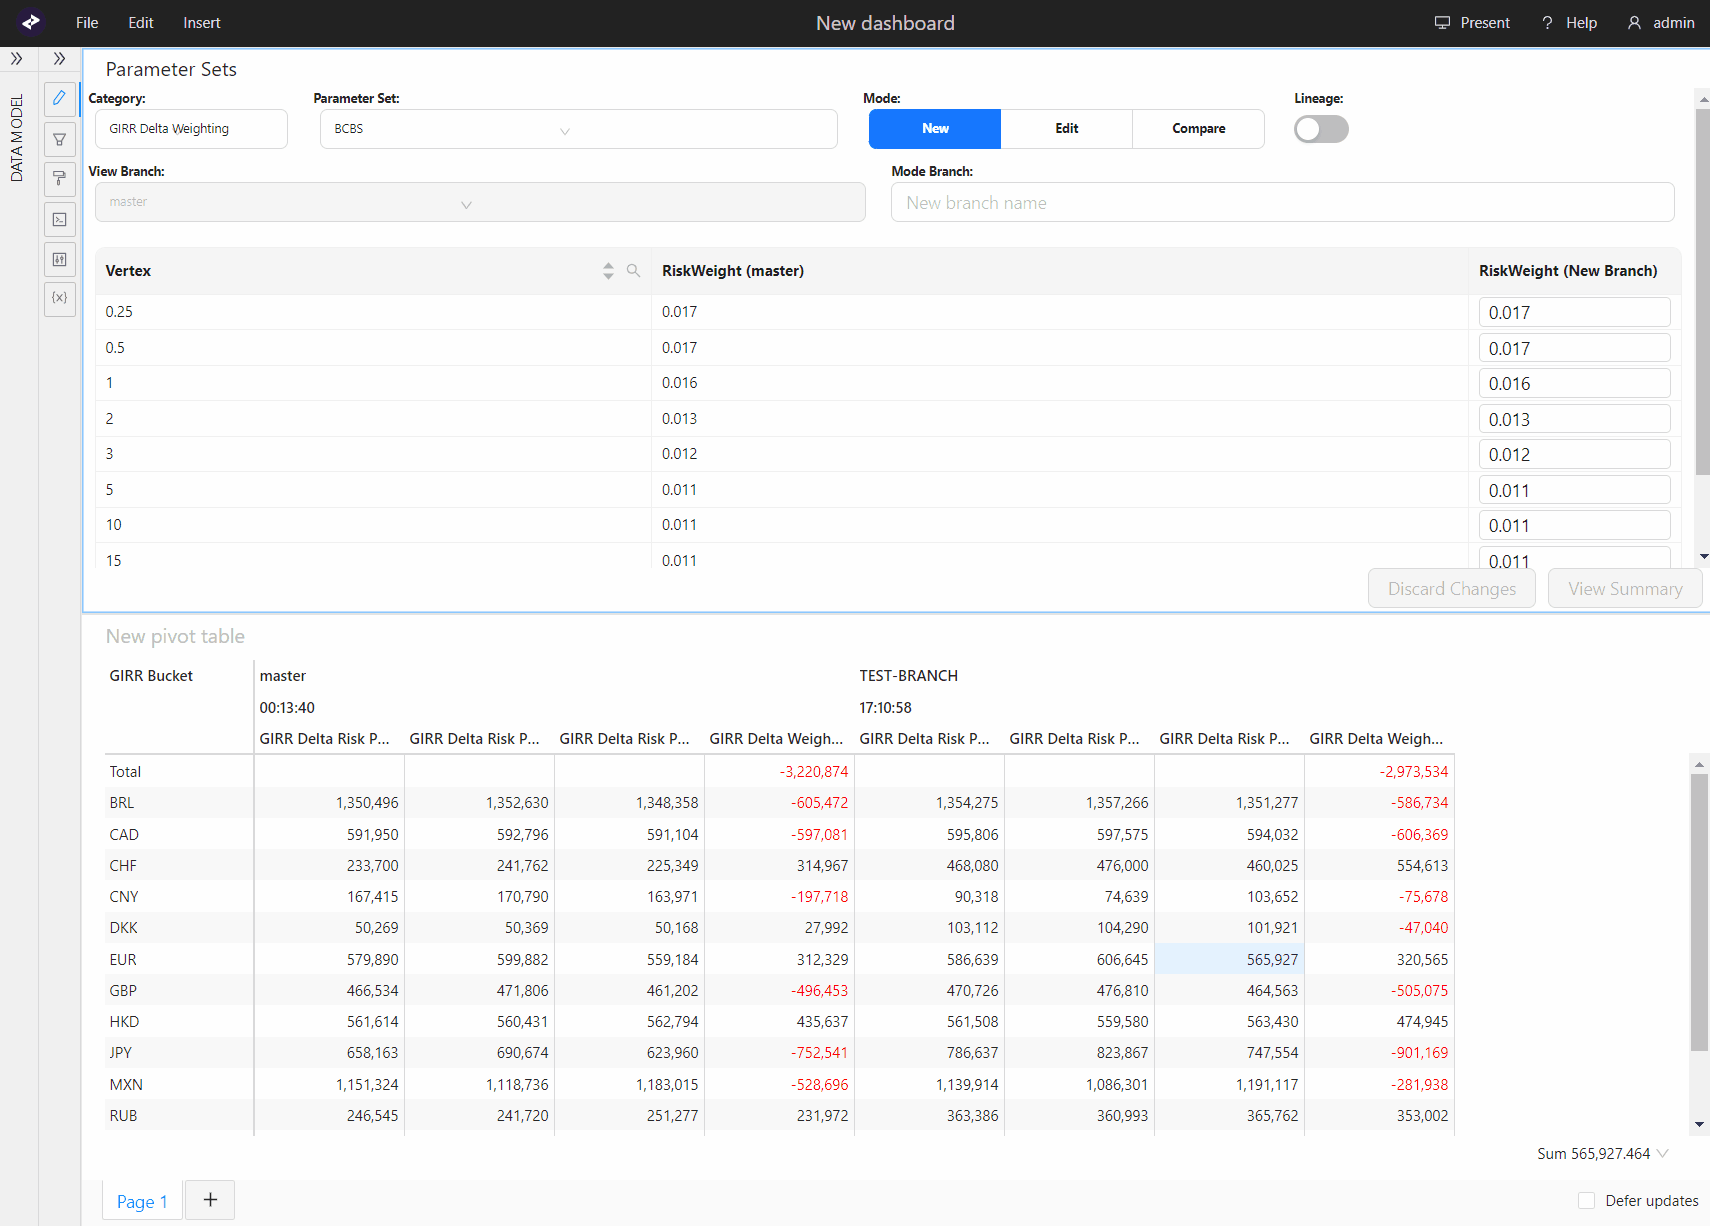 Options available in Update WhatIf Summary window